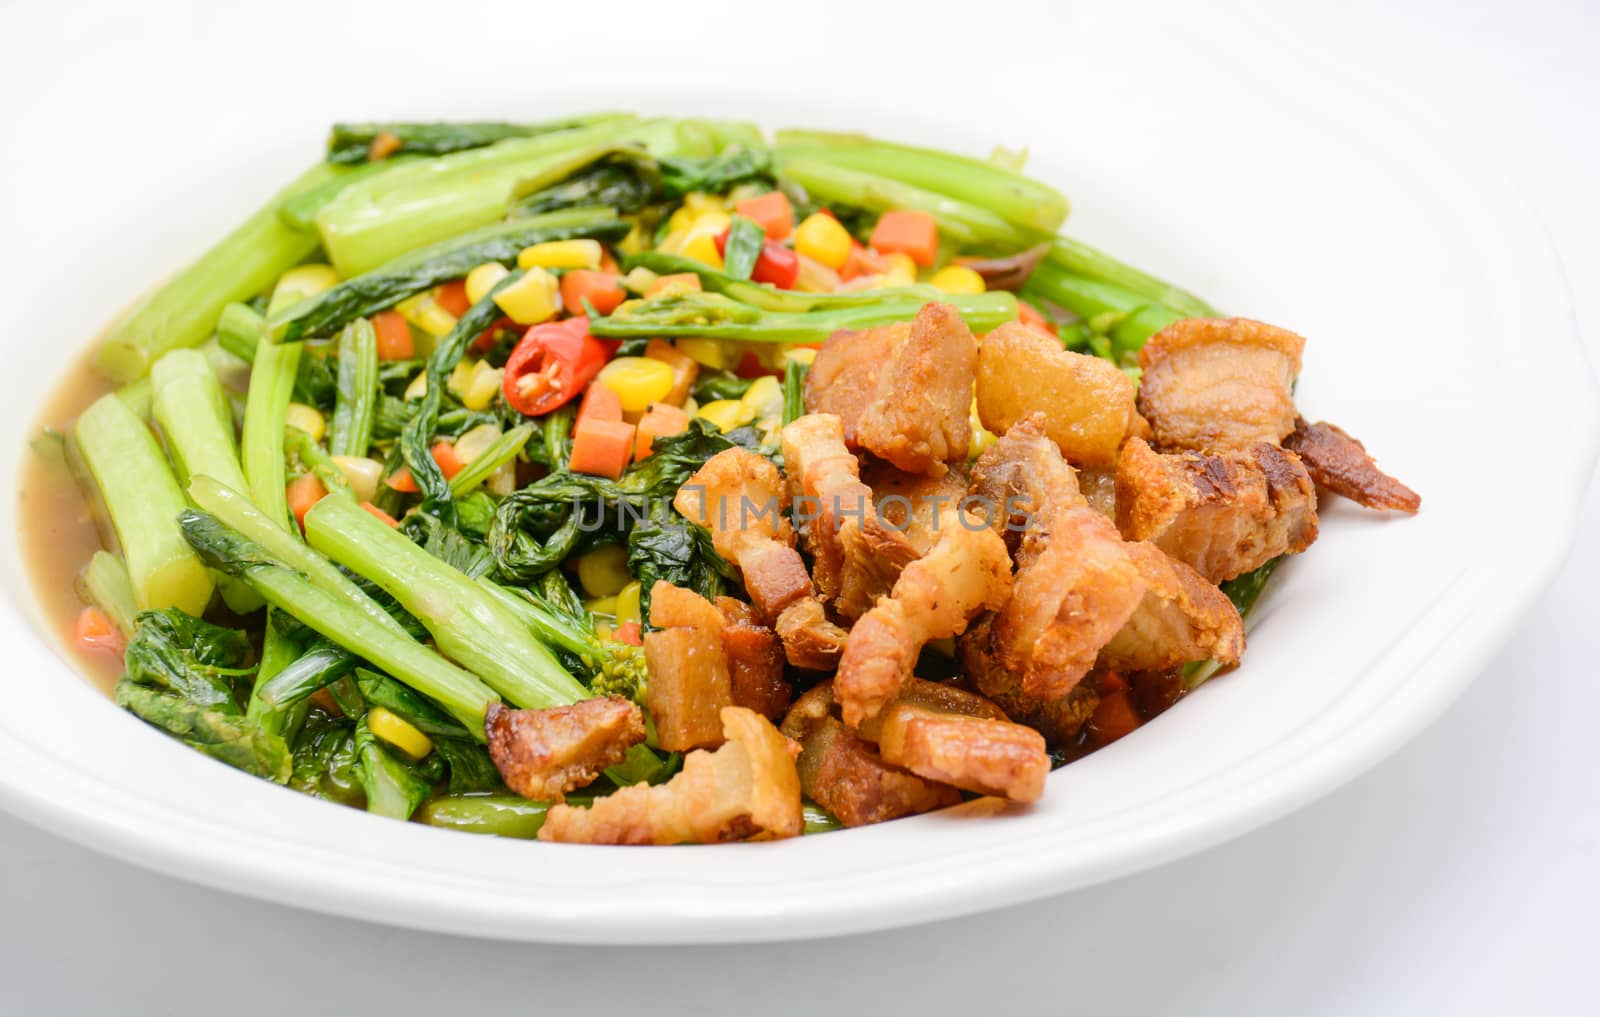 Stir fried Chinese kale with oyster sauce and pork by yuiyuize